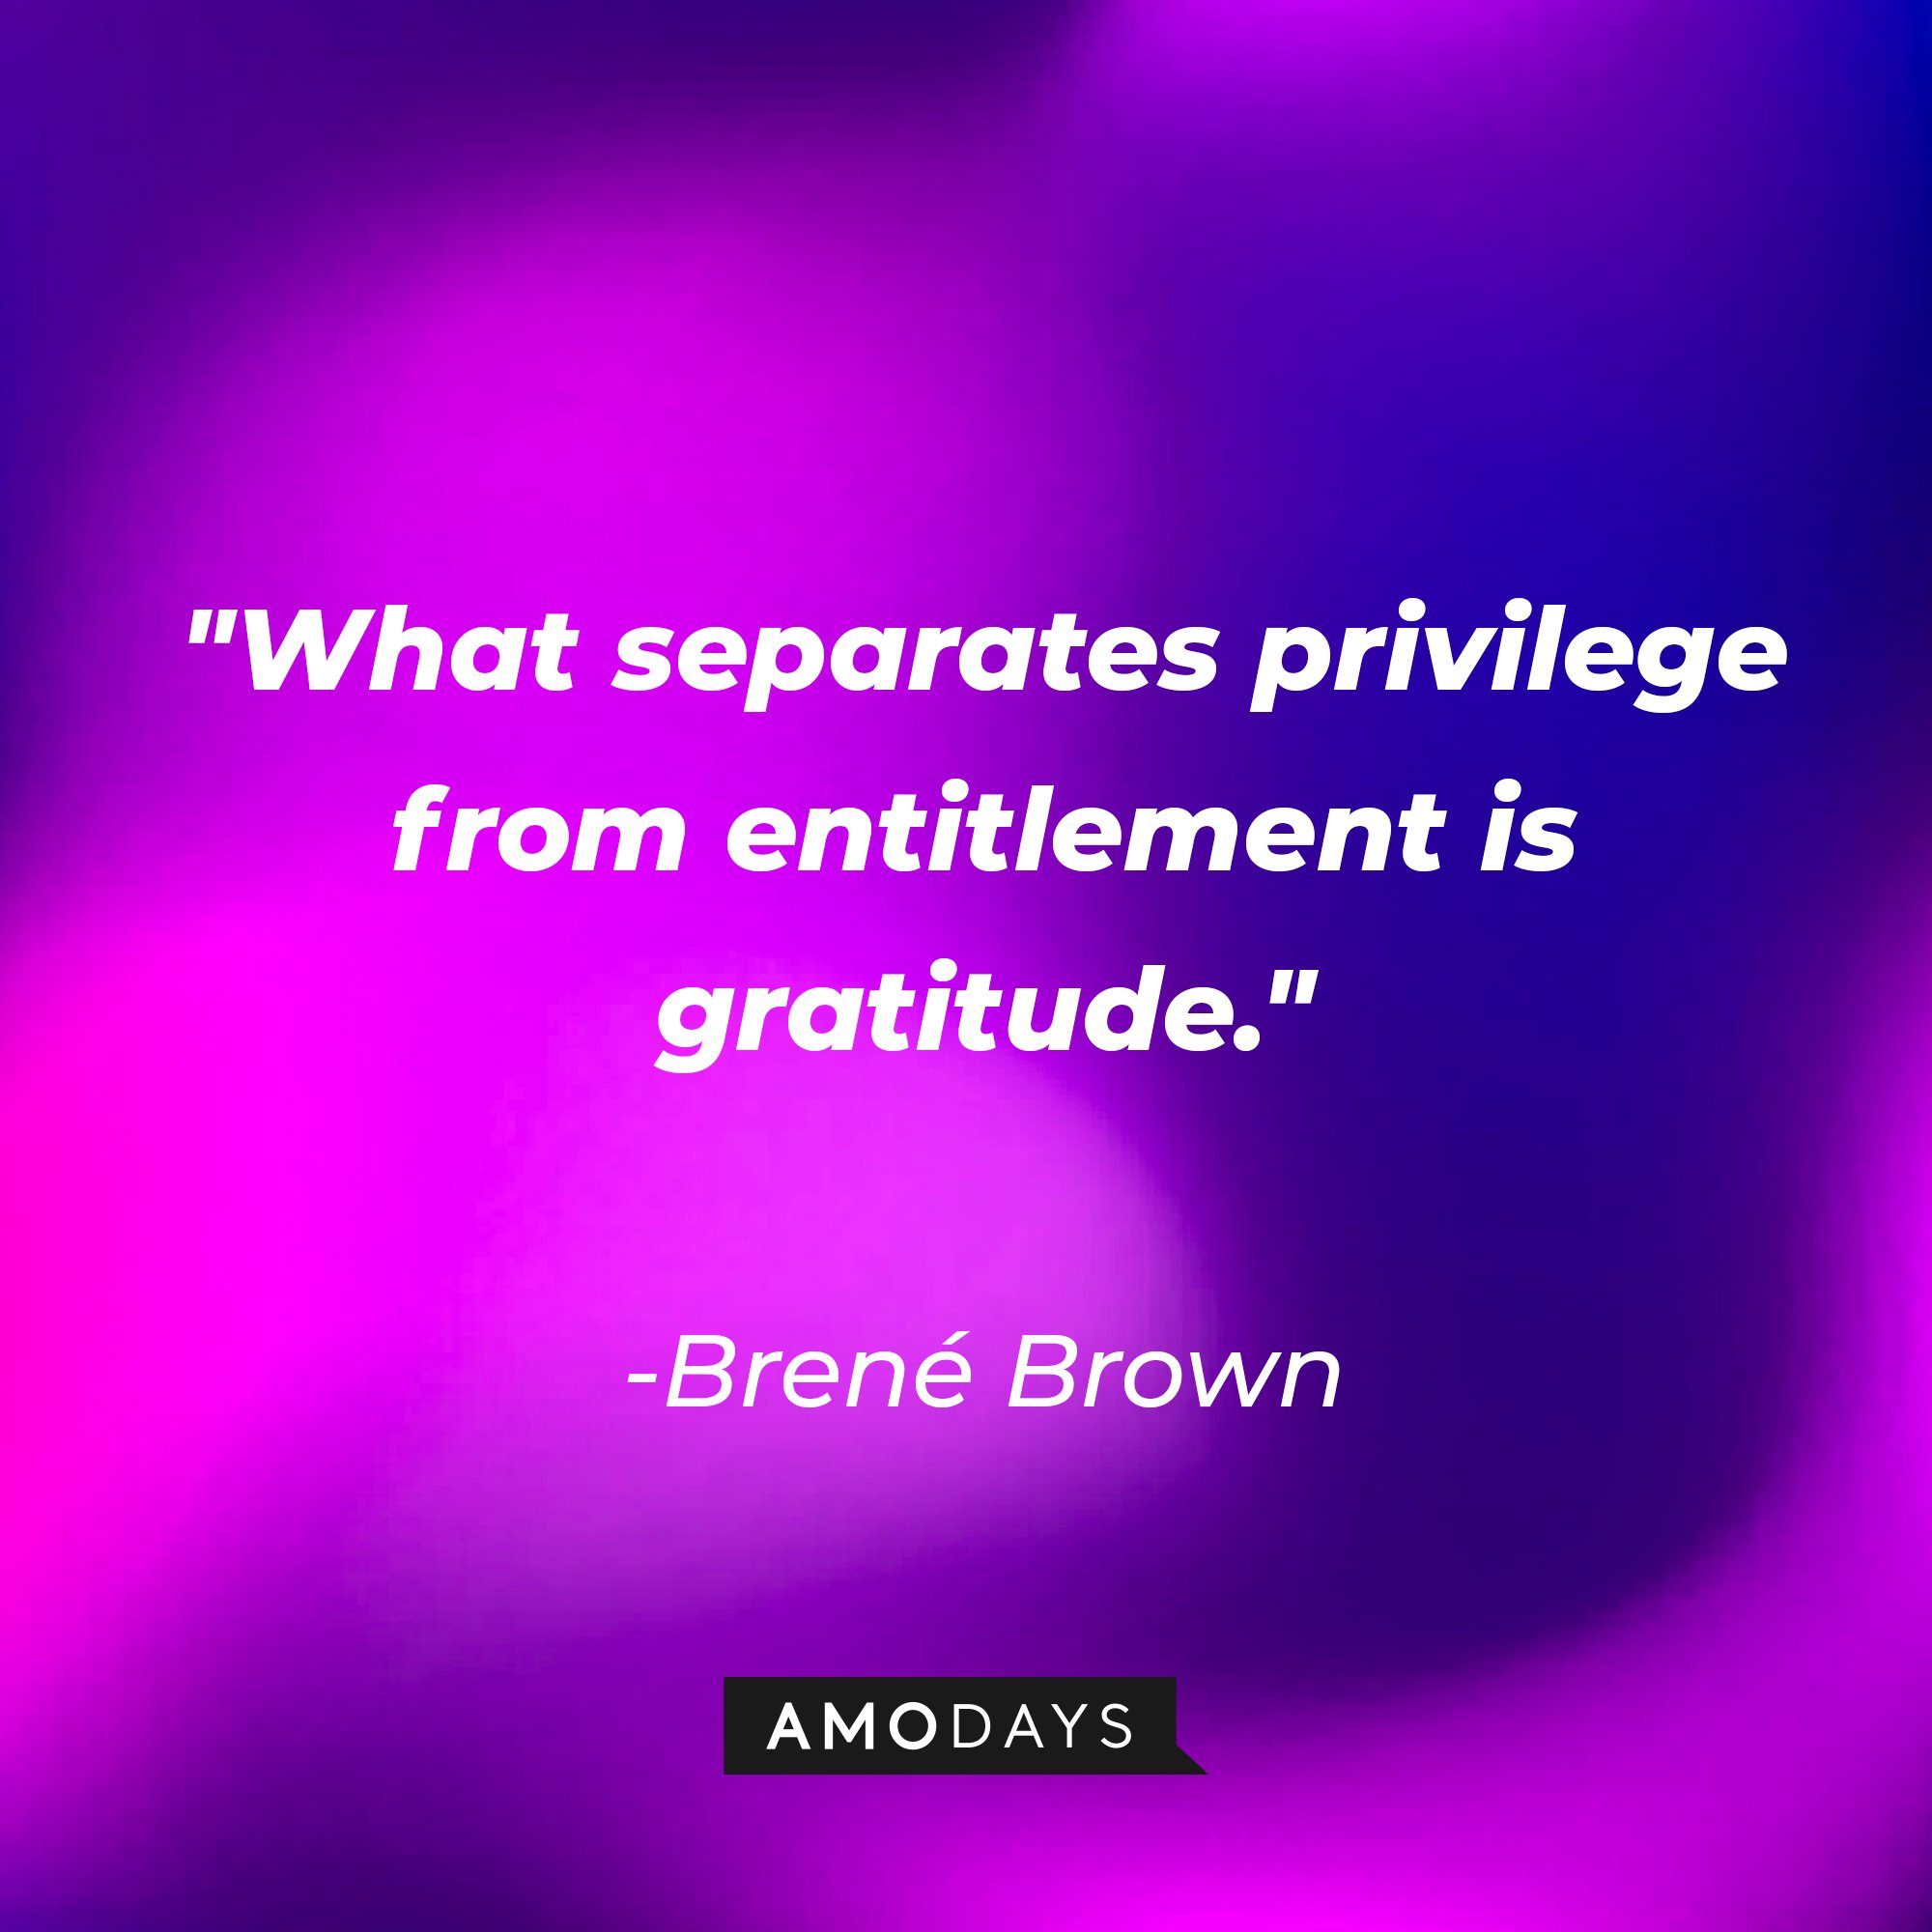 Brené Brown’s quote: "What separates privilege from entitlement is gratitude." | Image: AmoDays